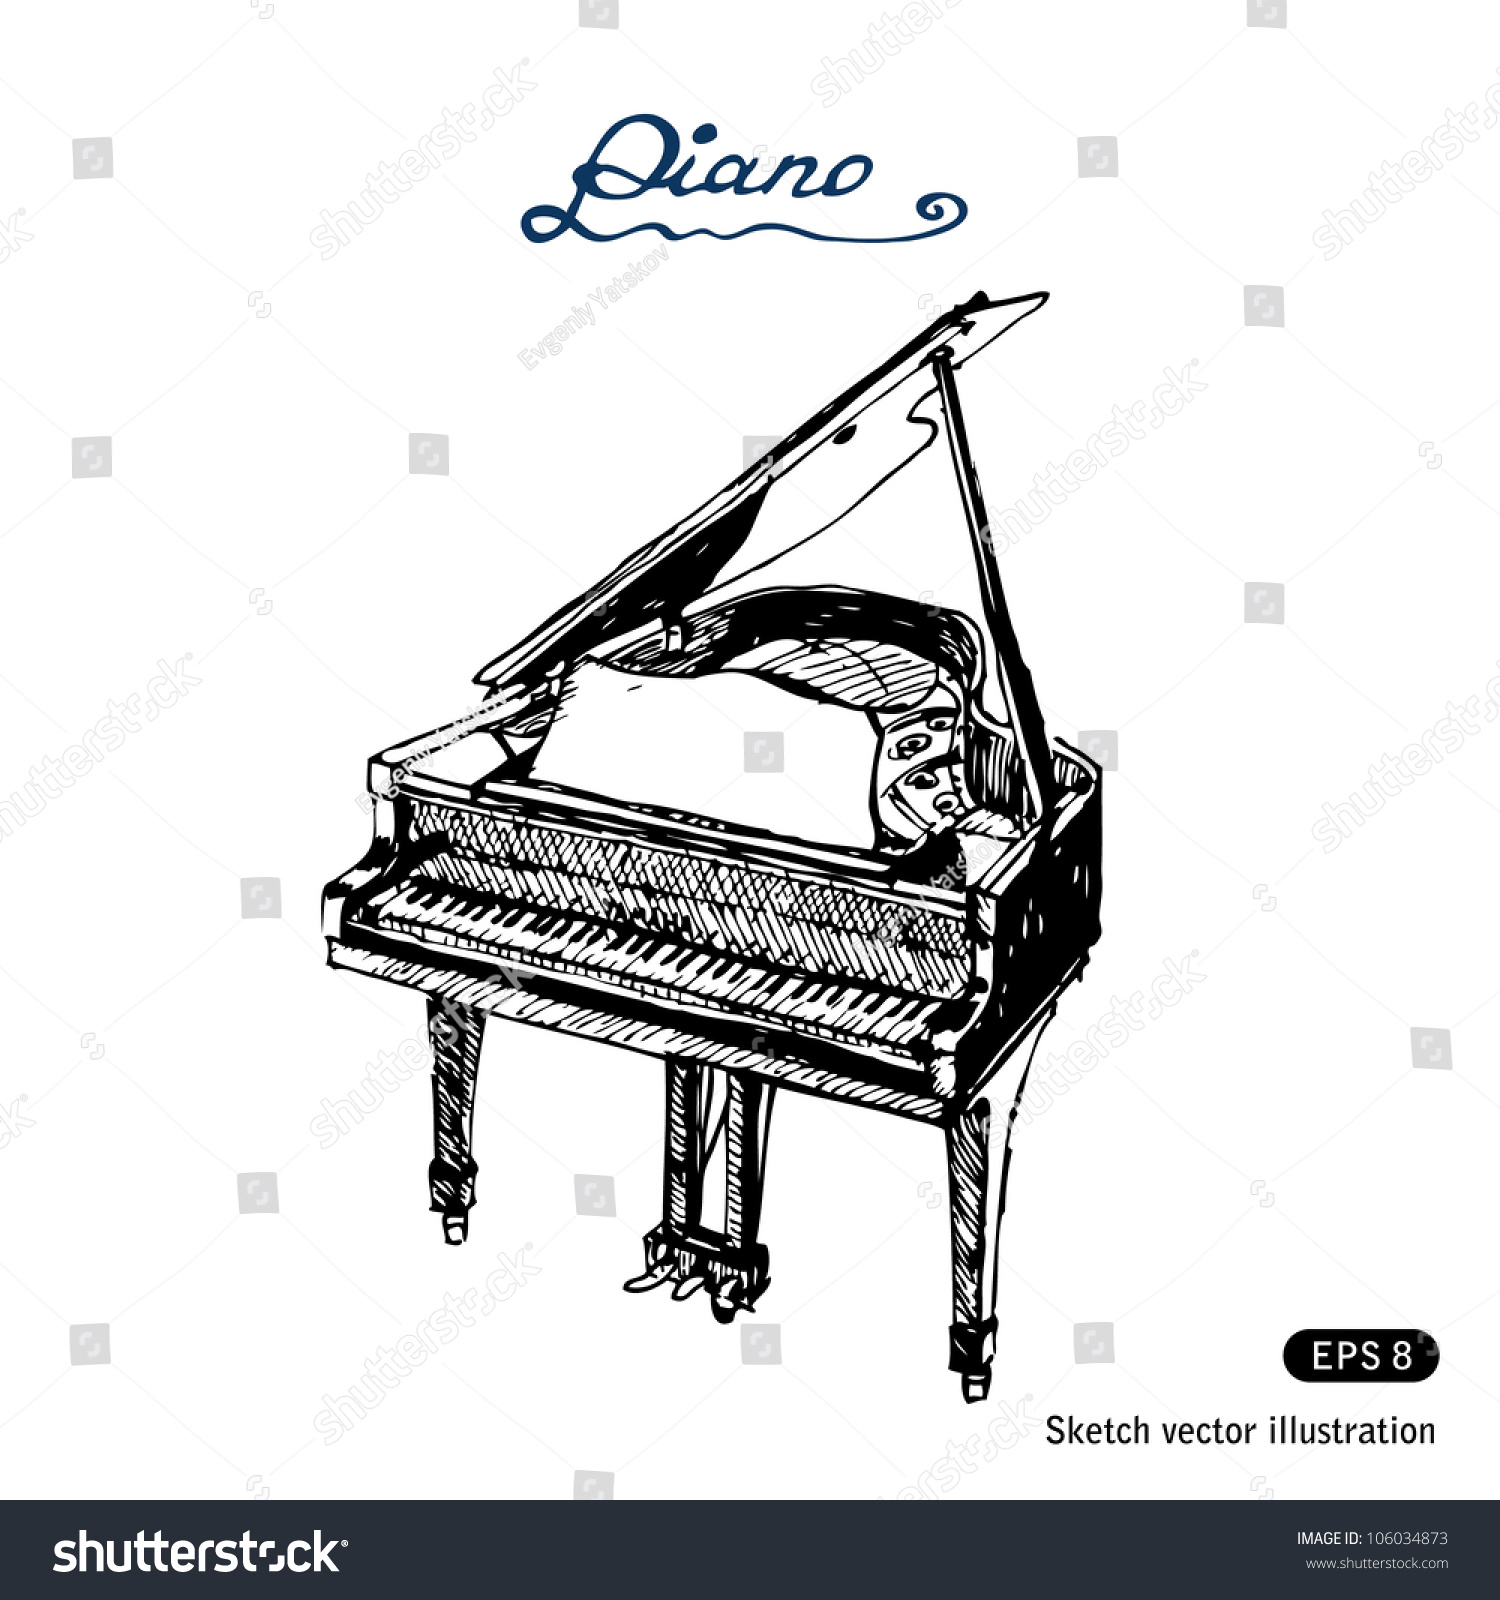 Grand Piano. Hand Drawn Sketch Illustration Isolated On White